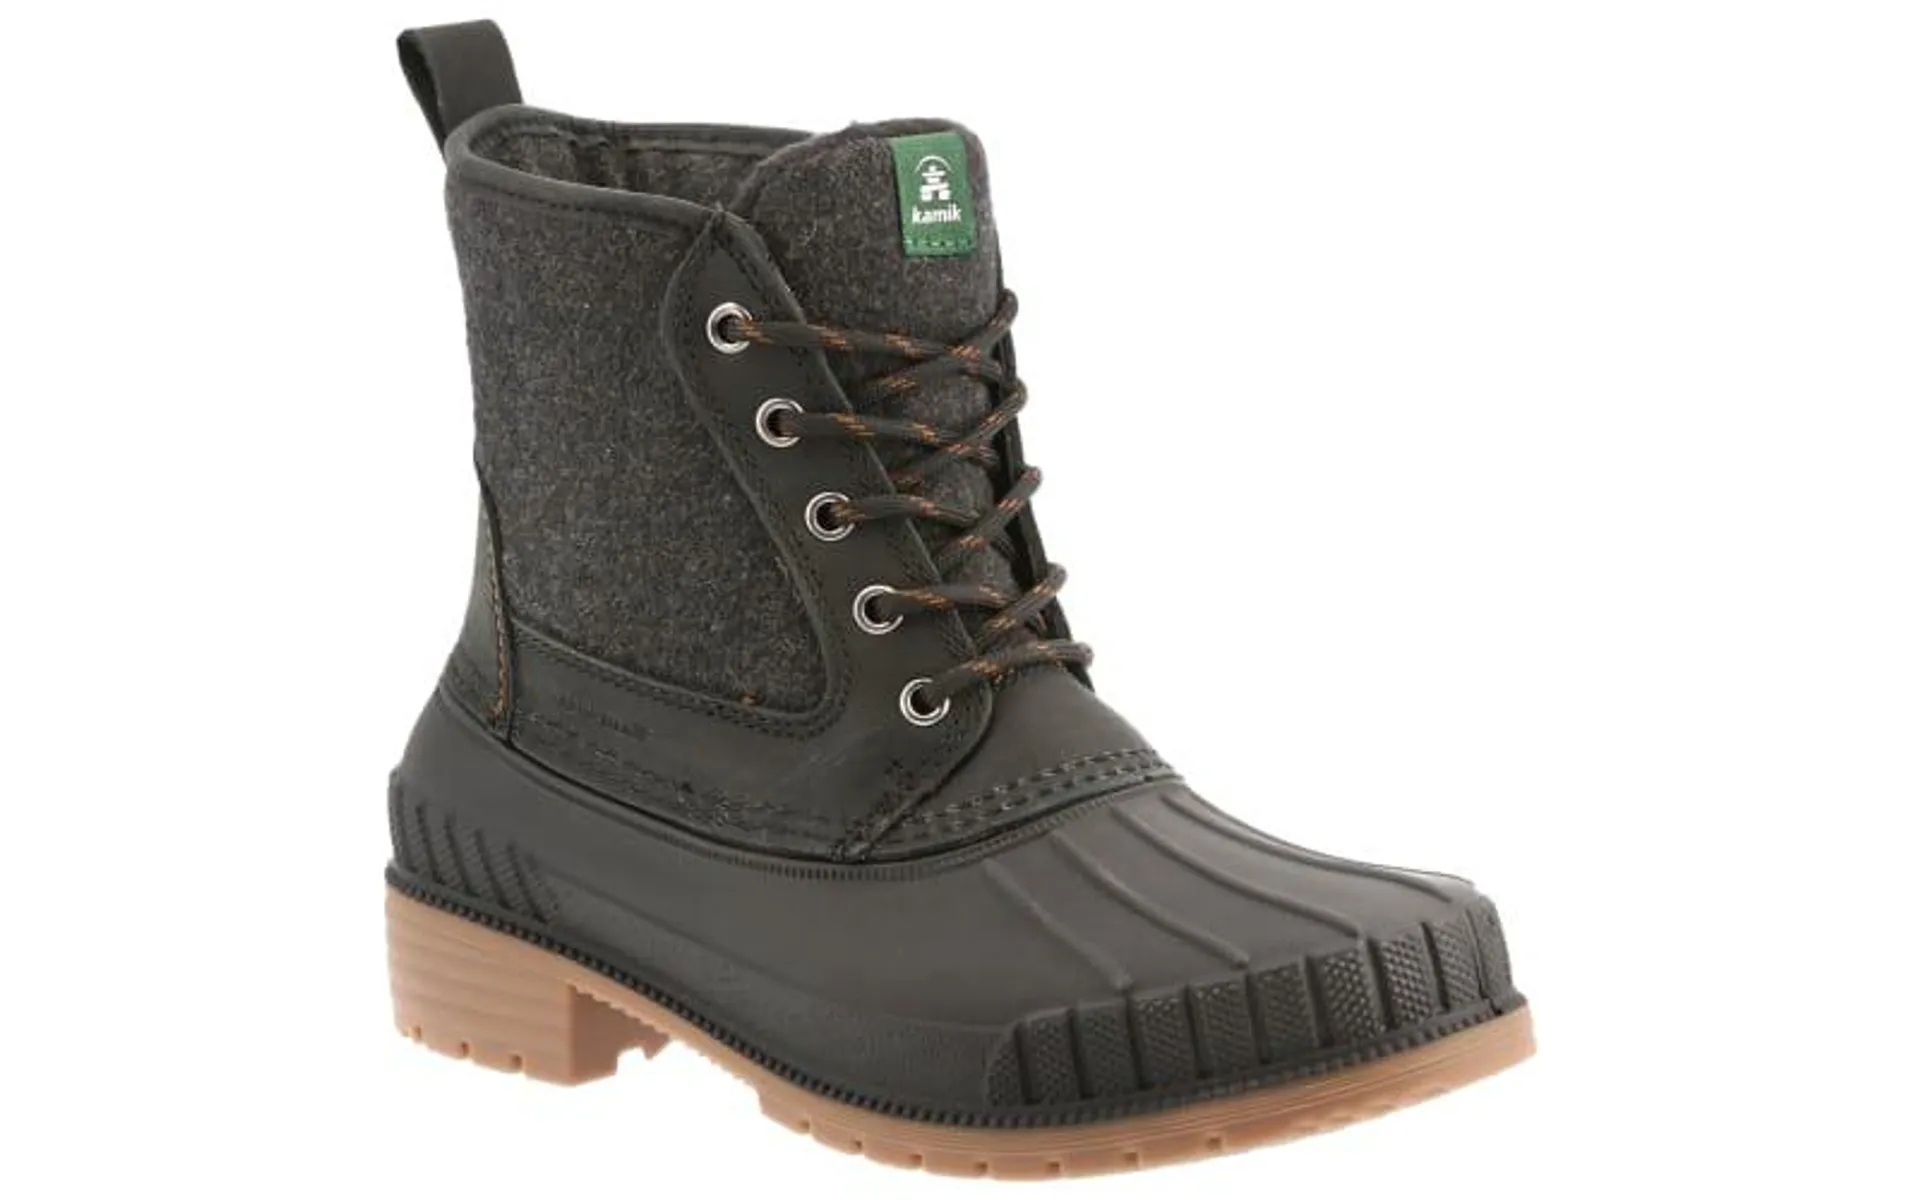 Kamik Sienna Mid Insulated Waterproof Pac Boots for Ladies